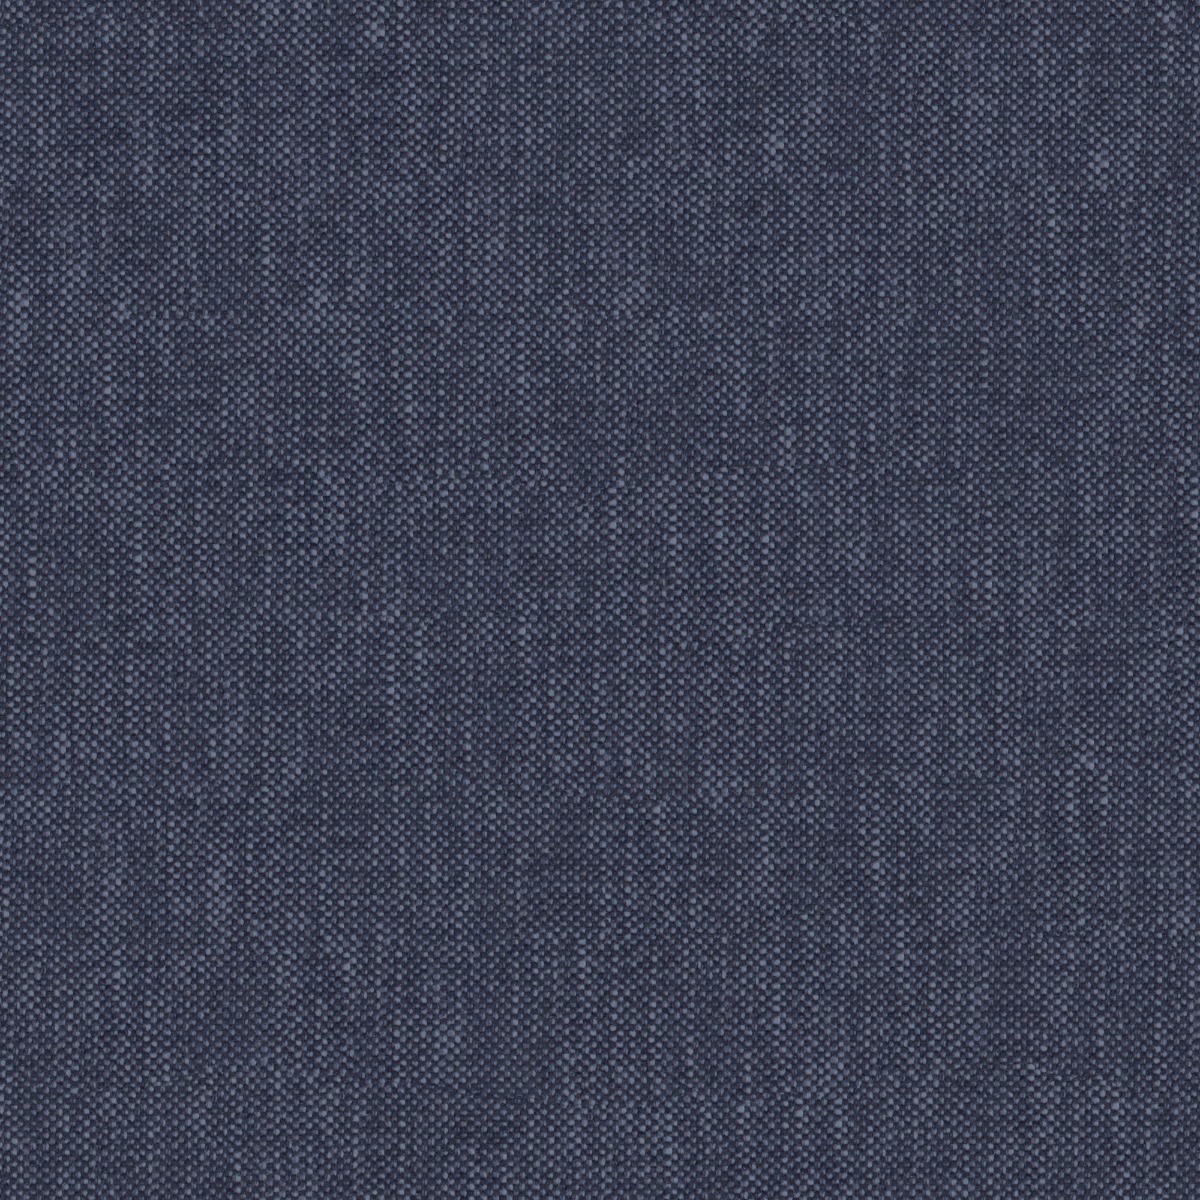 A seamless fabric texture with plain blue chenille units arranged in a None pattern